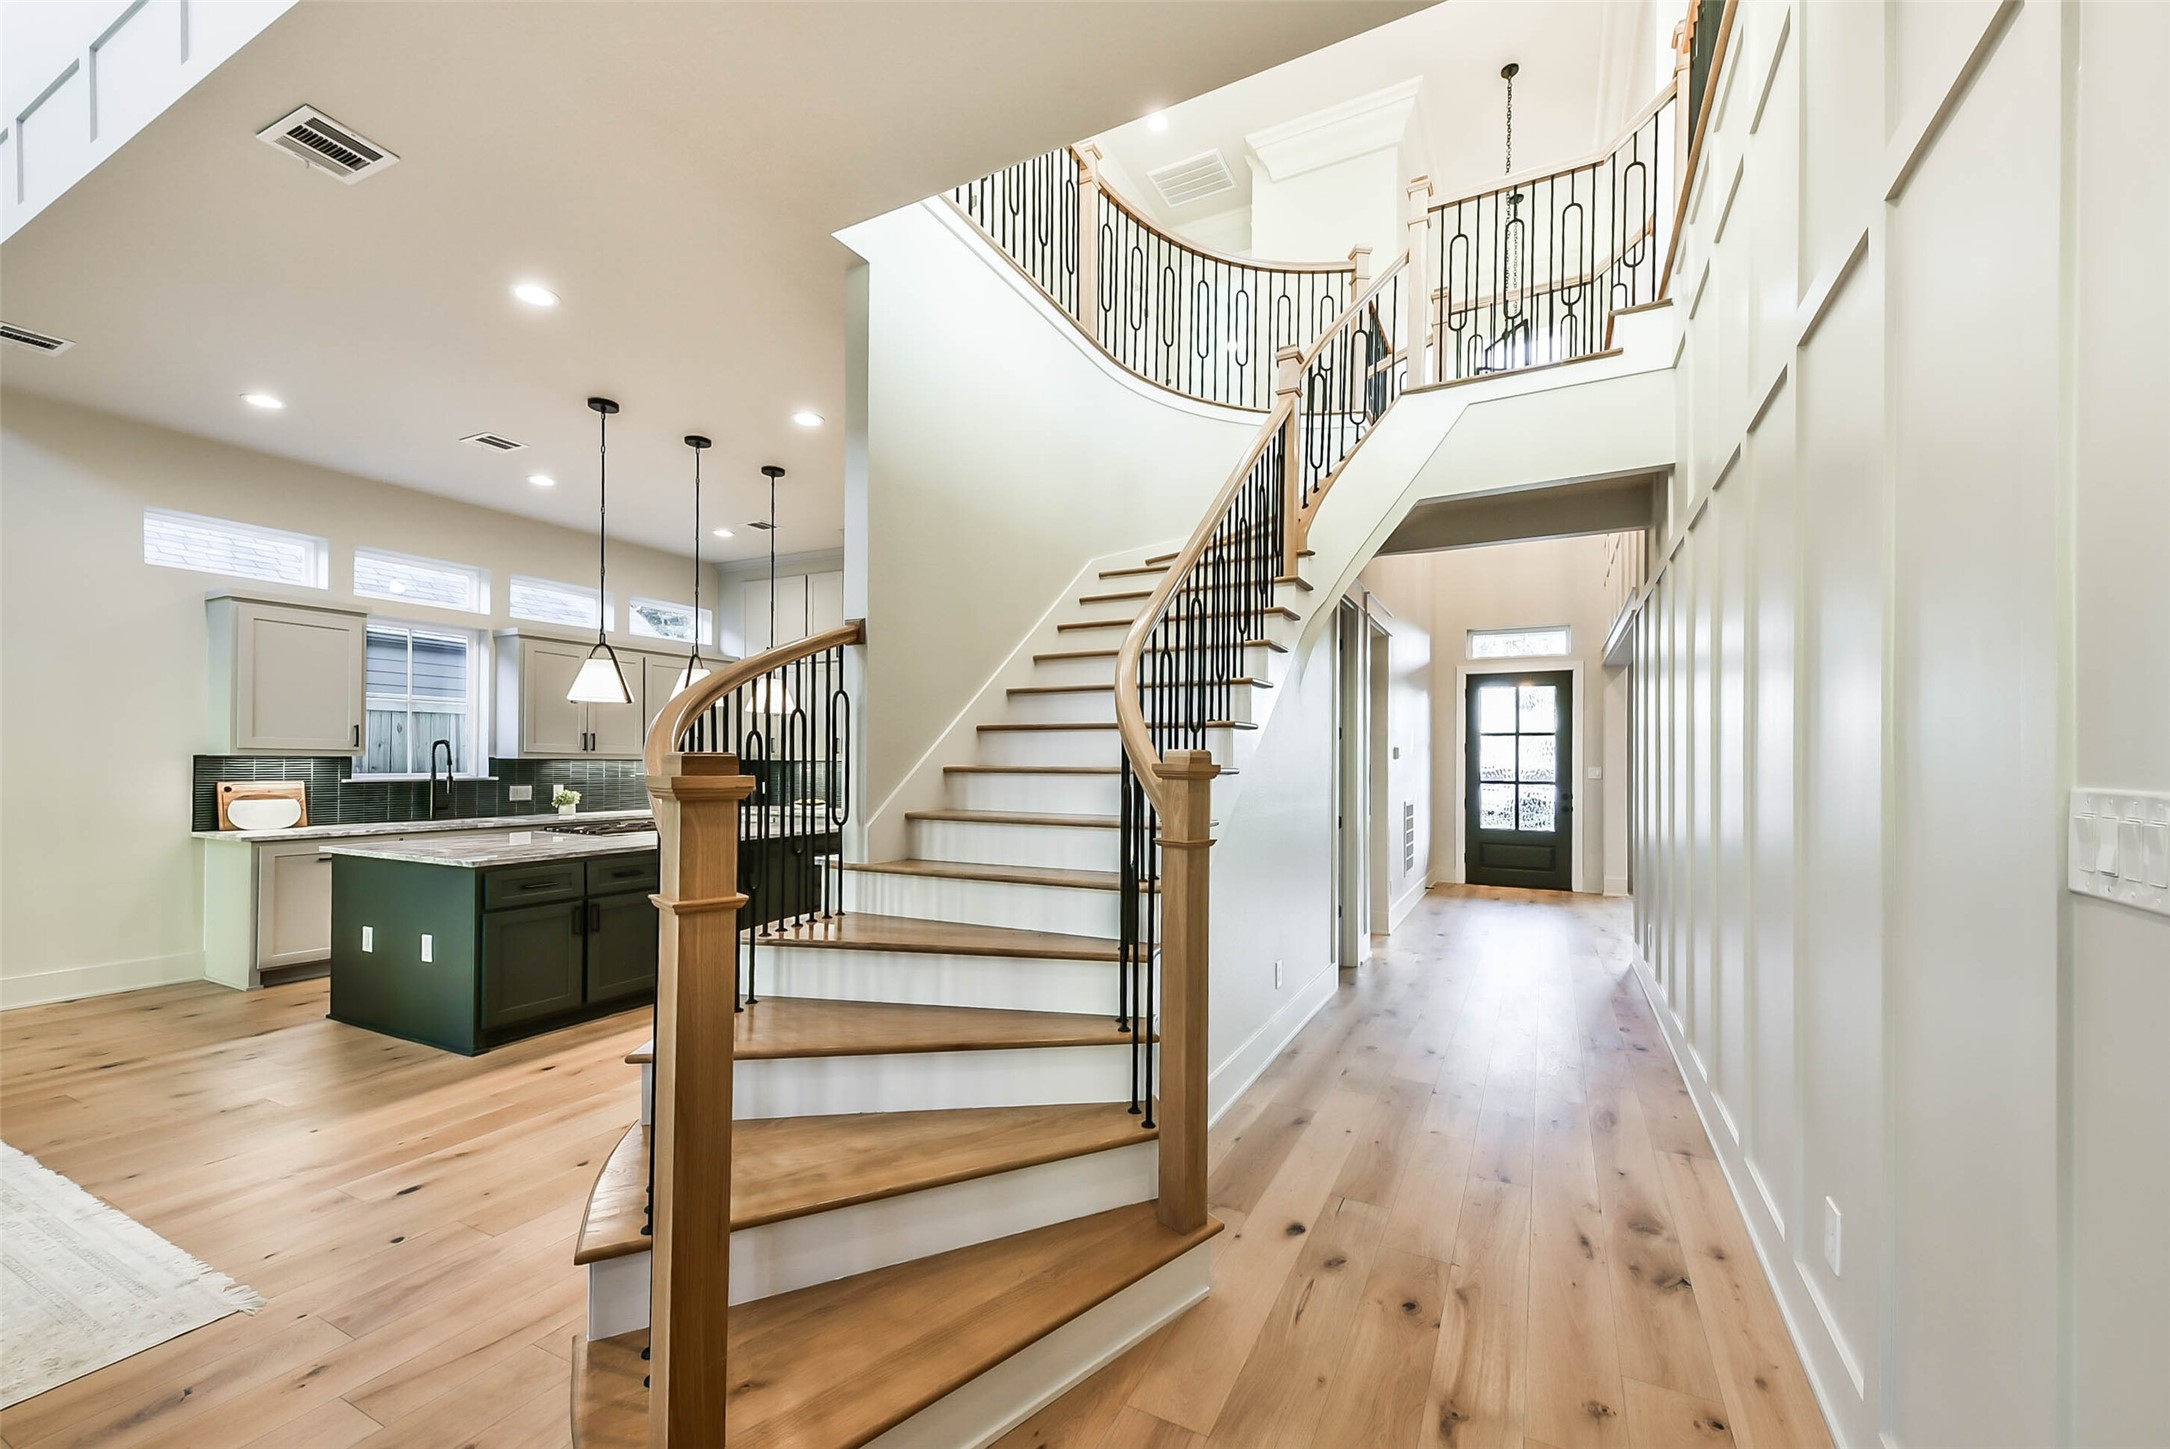 The elegant staircase with white oak treads invites your guests and family upstairs to the large game room and additional bedrooms.